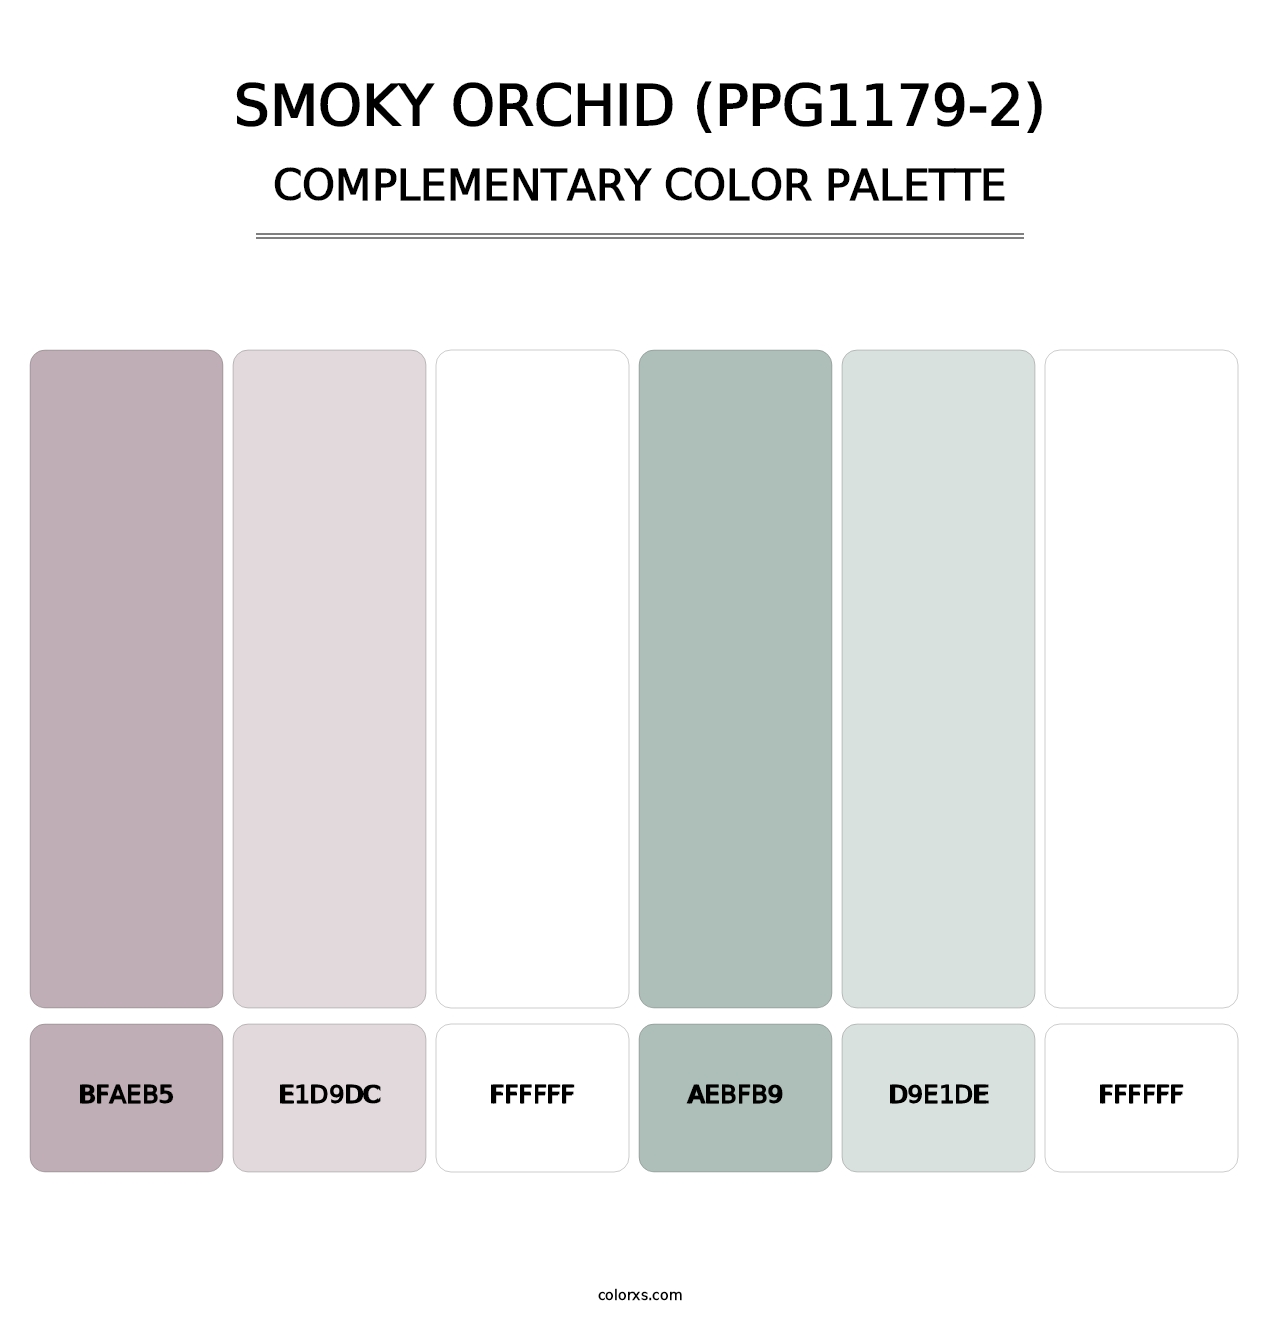 Smoky Orchid (PPG1179-2) - Complementary Color Palette